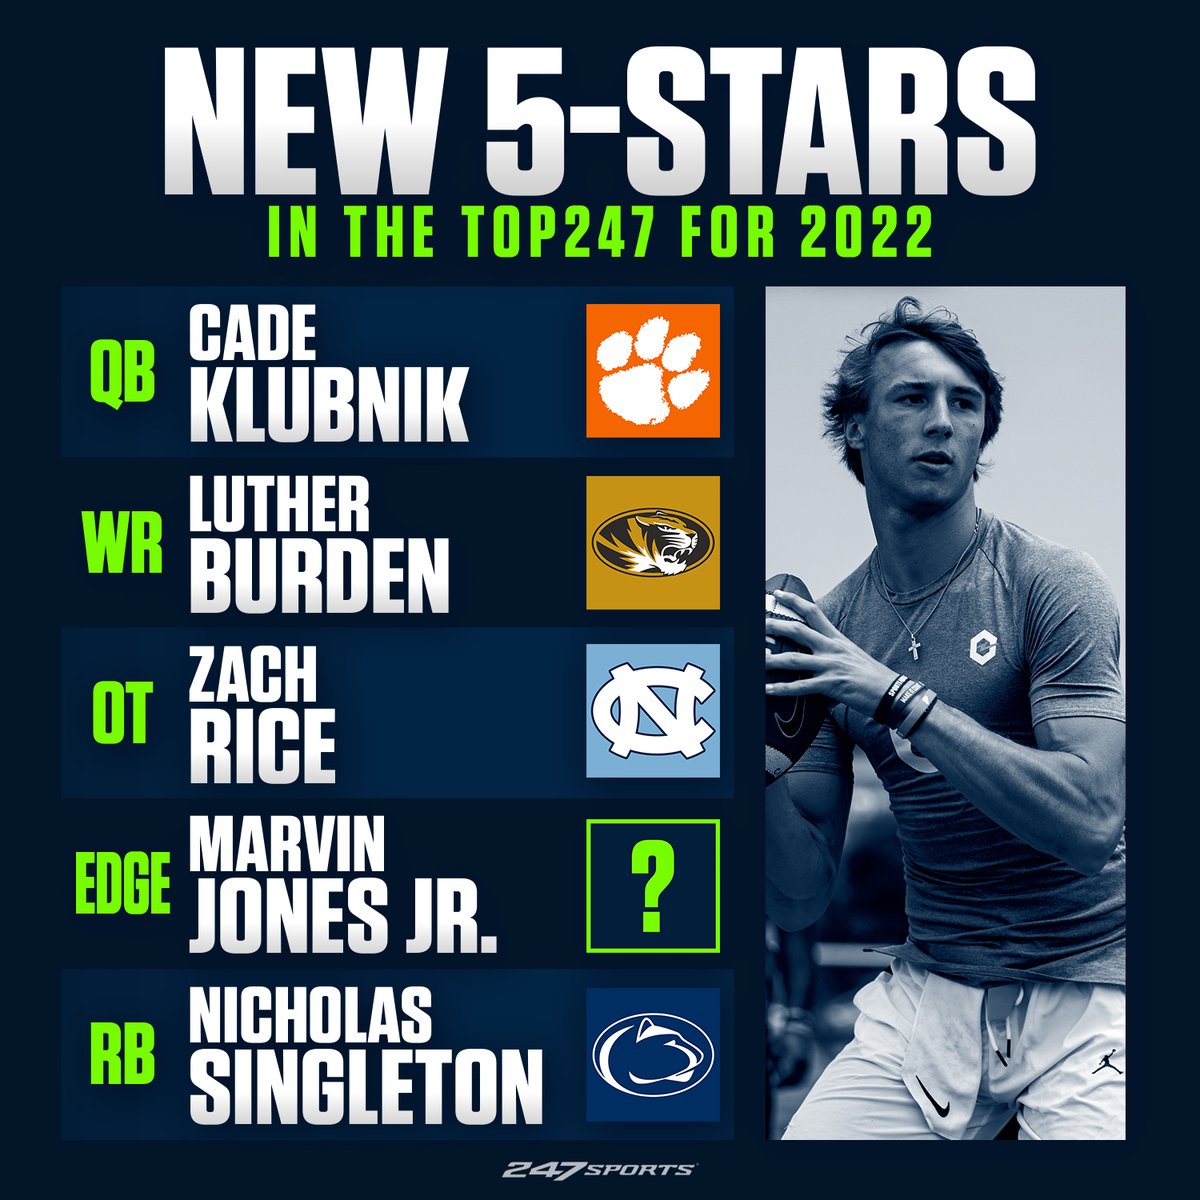 RT @247Sports: Analyzing the new 5-star prospects in the class of 2022.

Via @CSing57 

https://t.co/roOzVfeTLh https://t.co/1IermThmxU